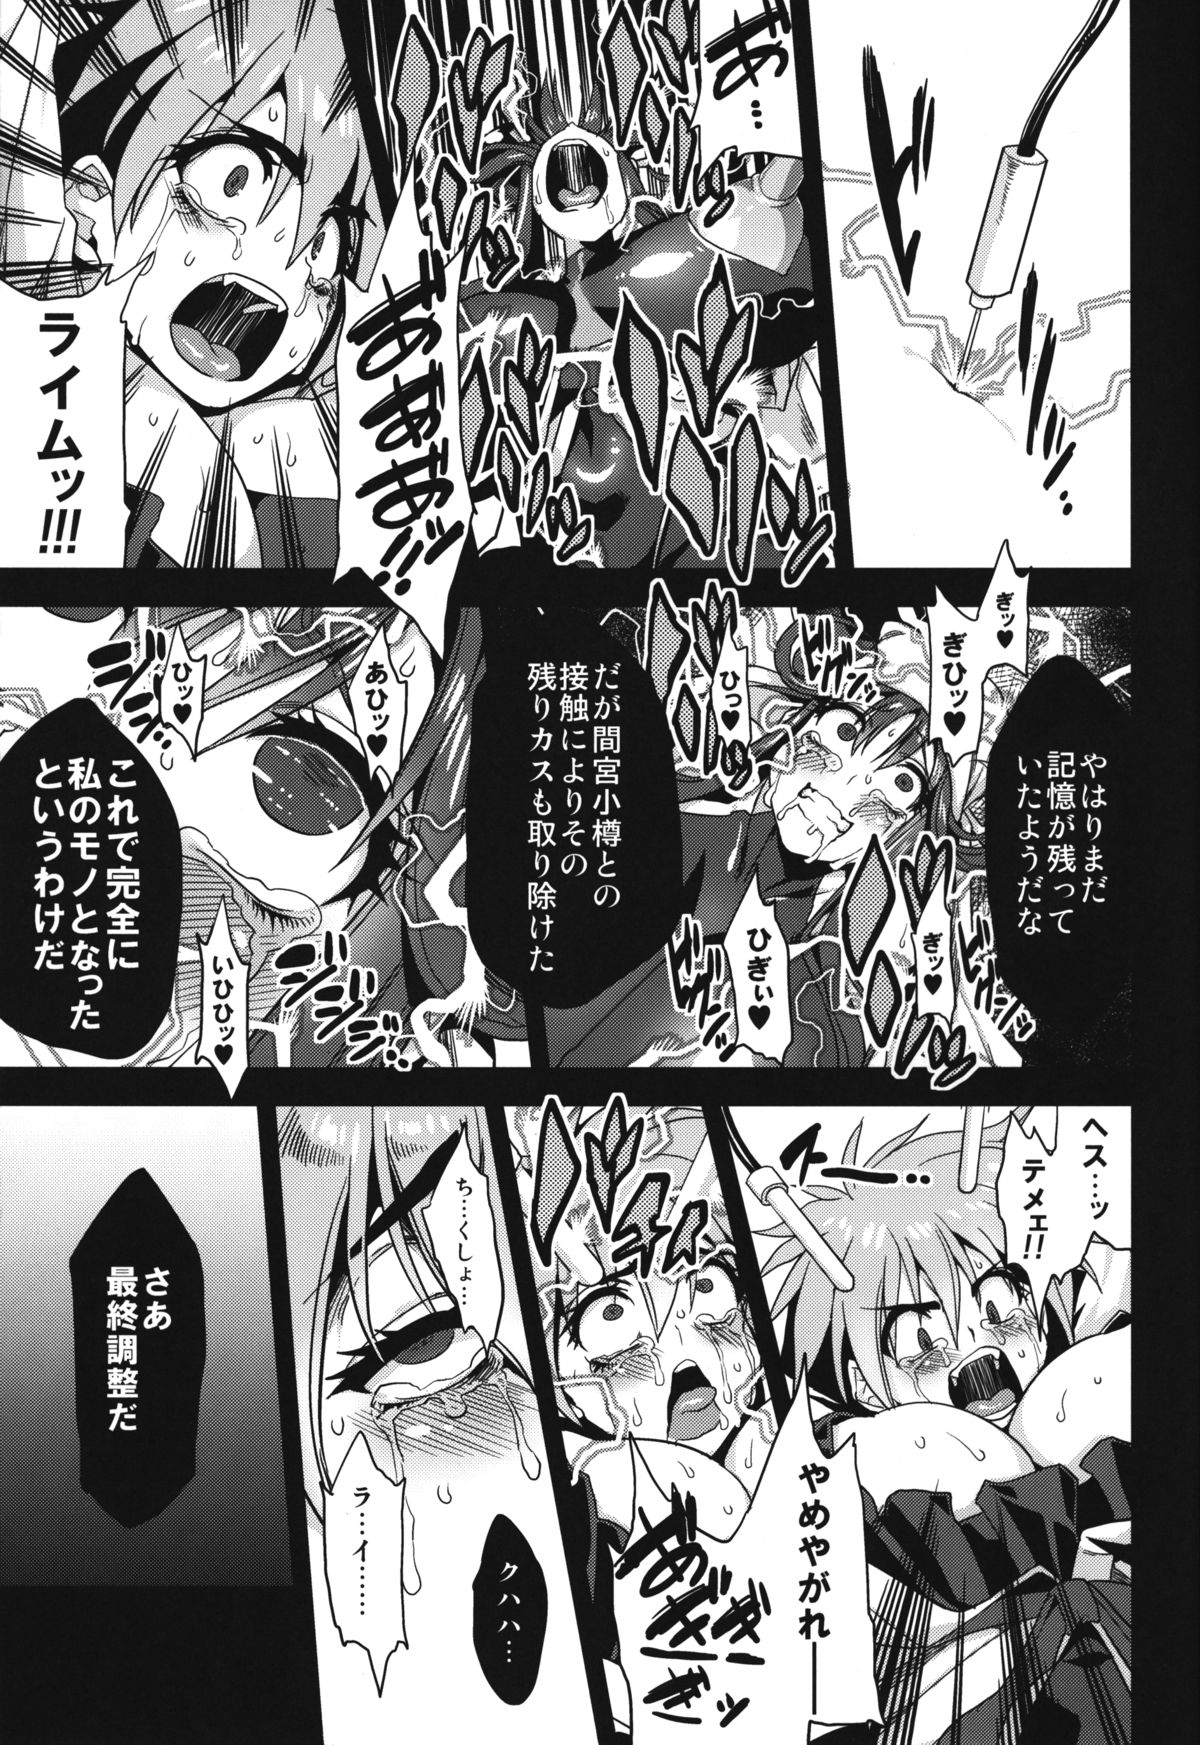 (C87) [OVing (Obui)] Hentai Marionette 3 (Saber Marionette J to X) page 10 full